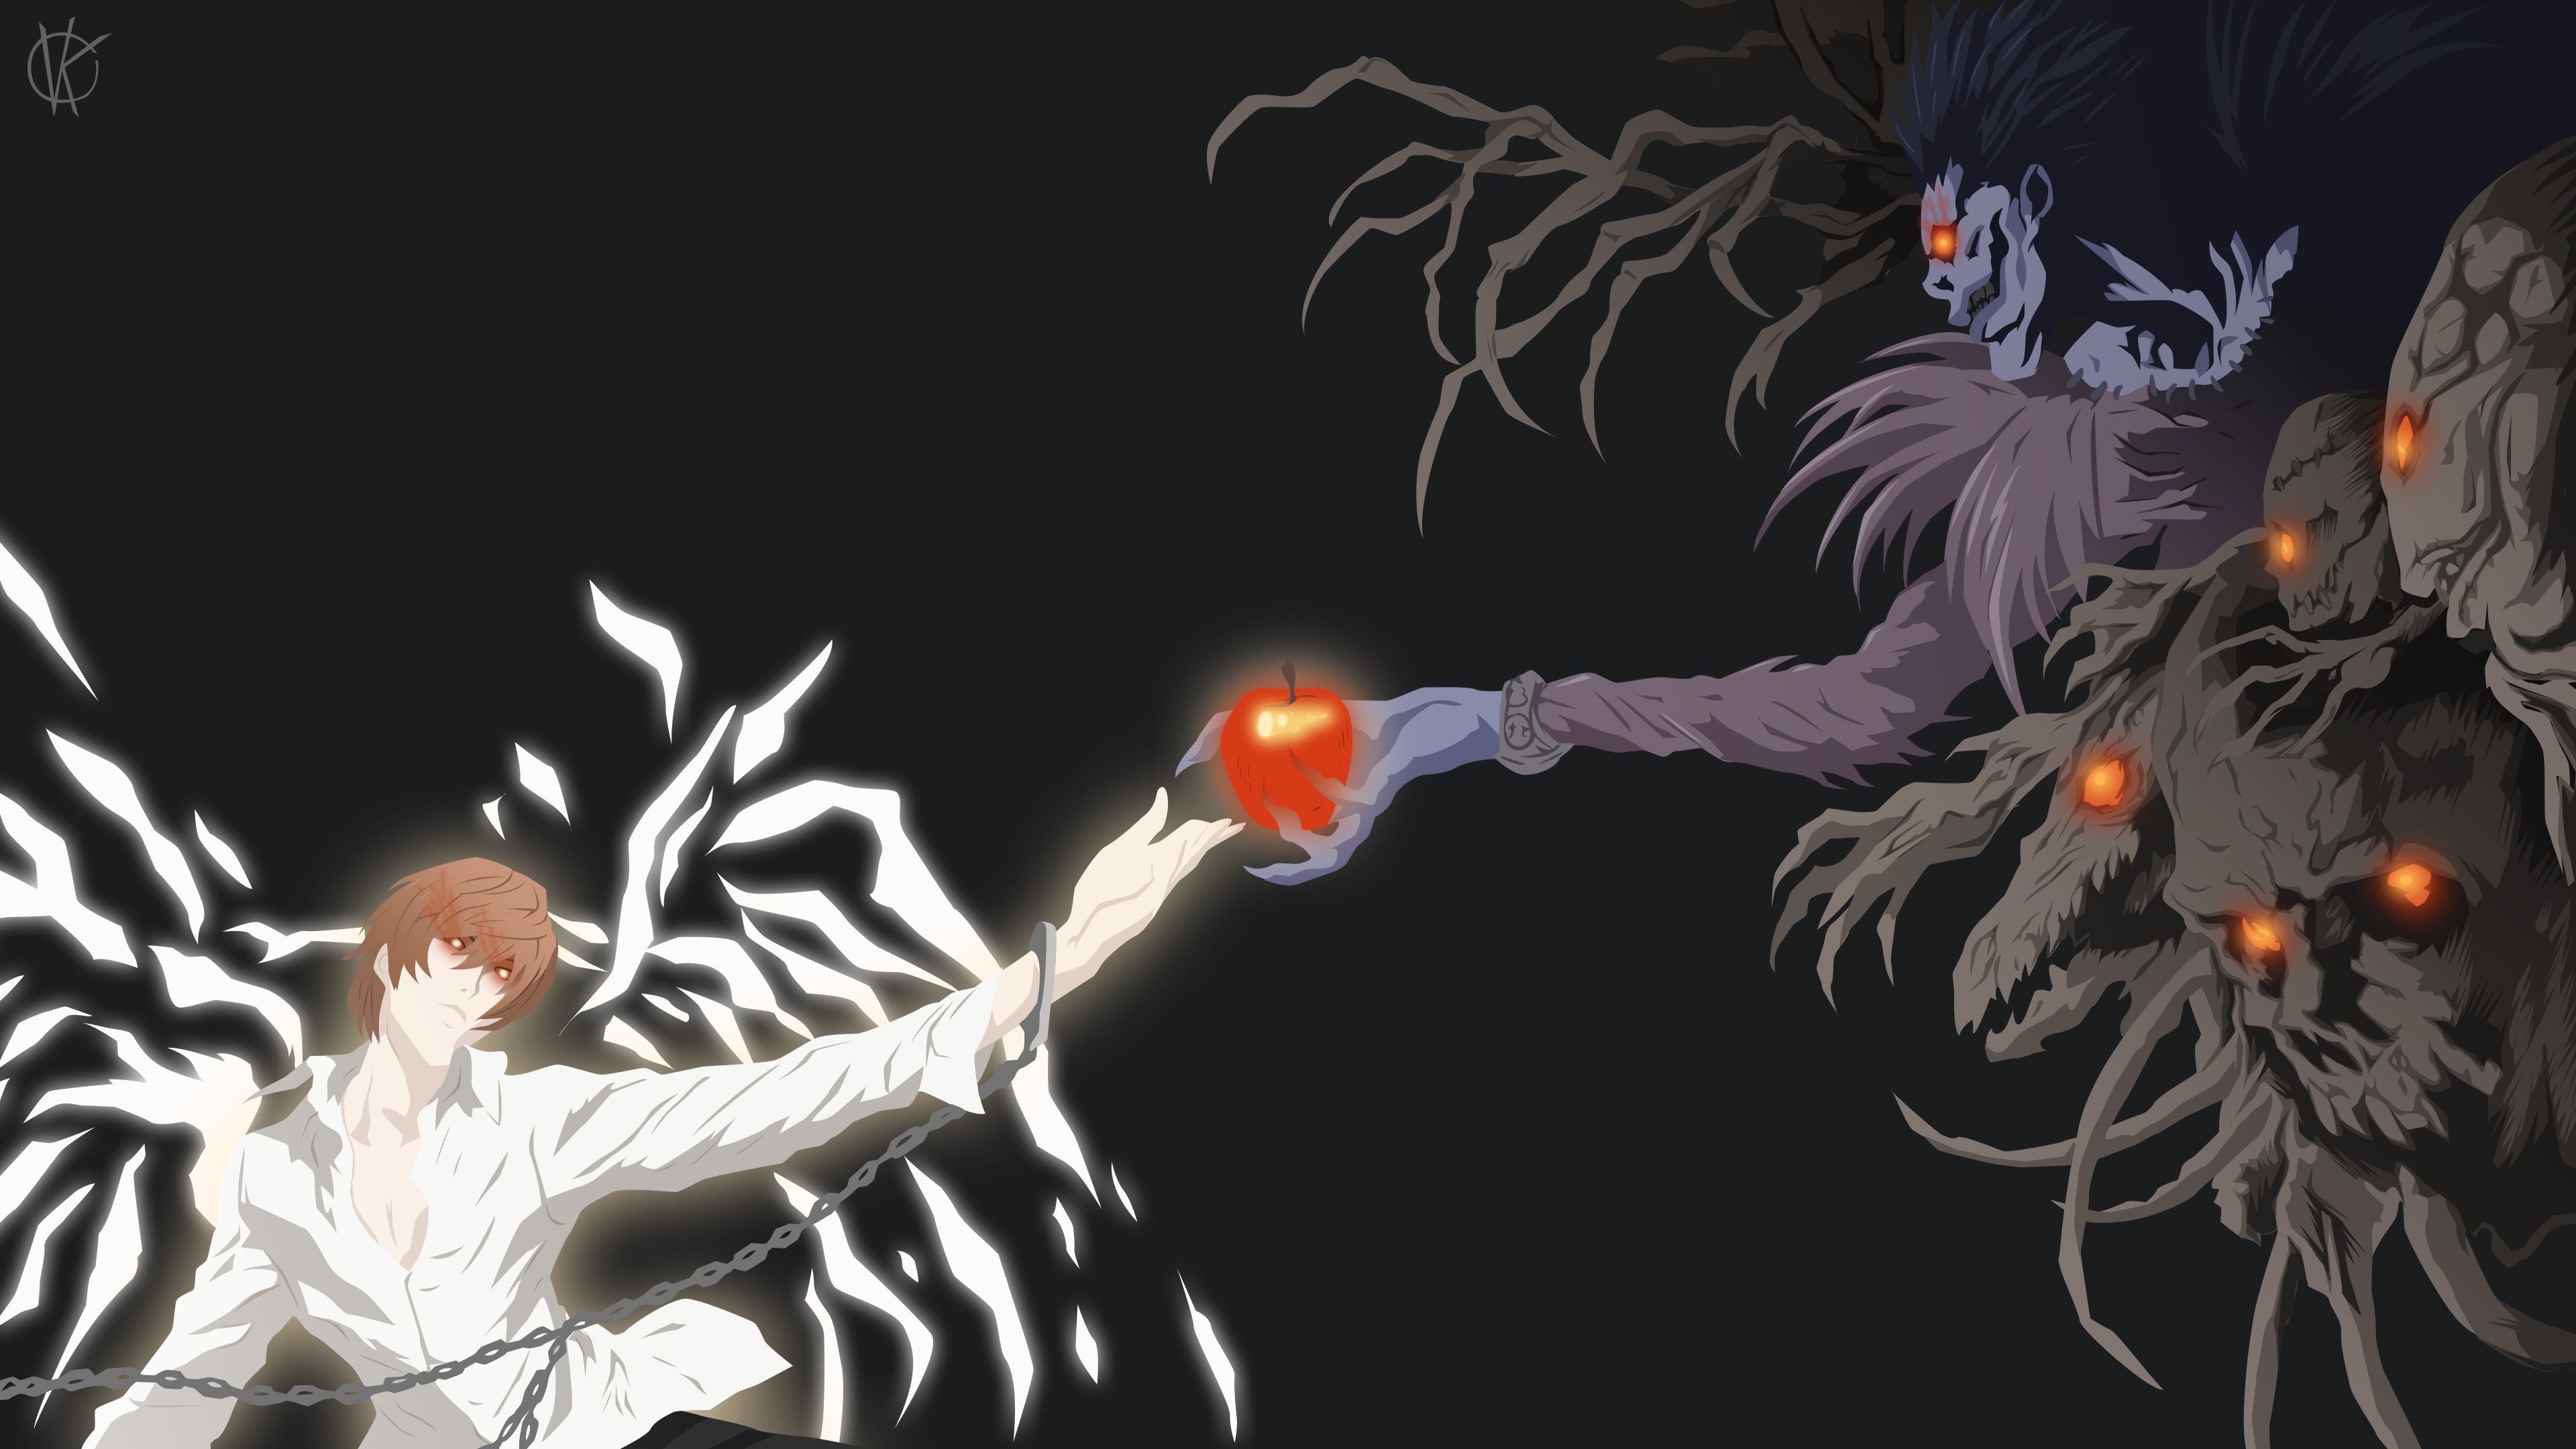 kira light yagami with handlock and ryuk with apple in hand death note 4k HD anime Wallpaper